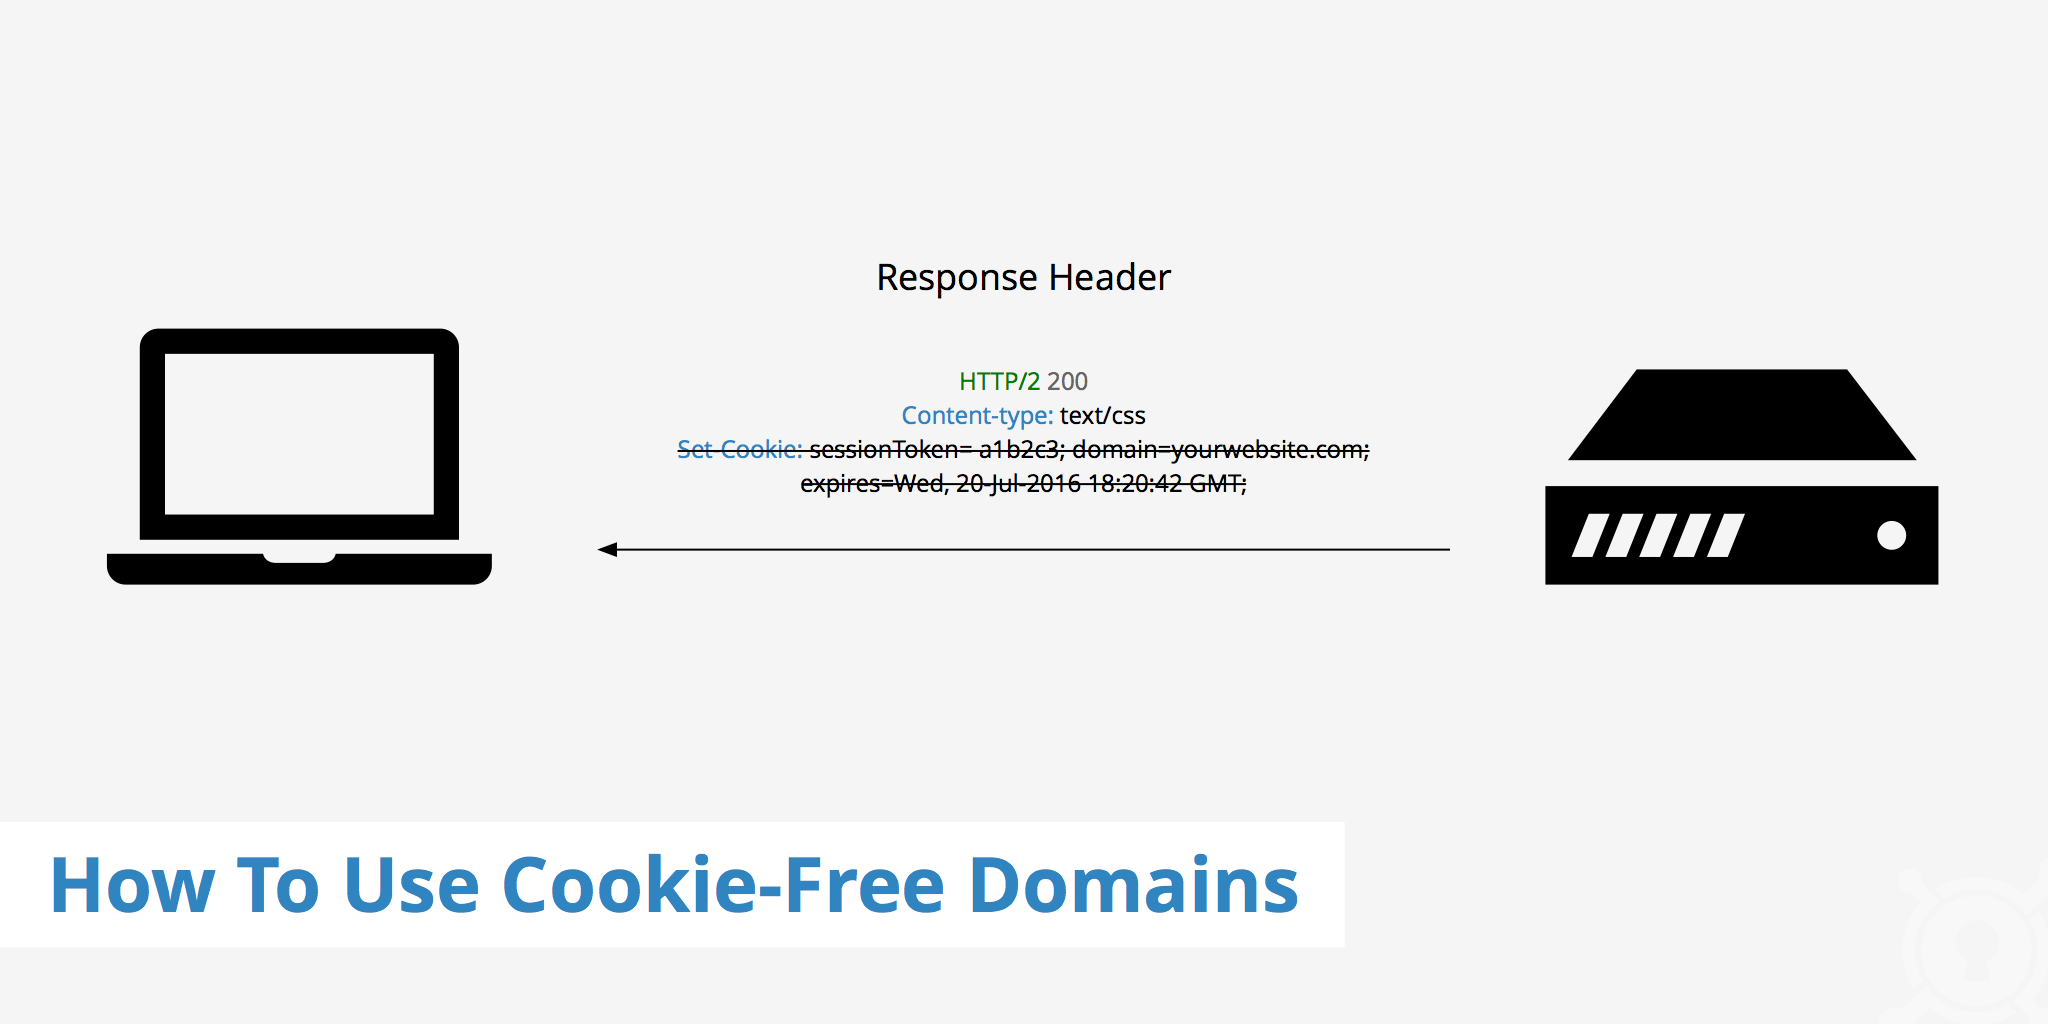 How to Use Cookie-Free Domains